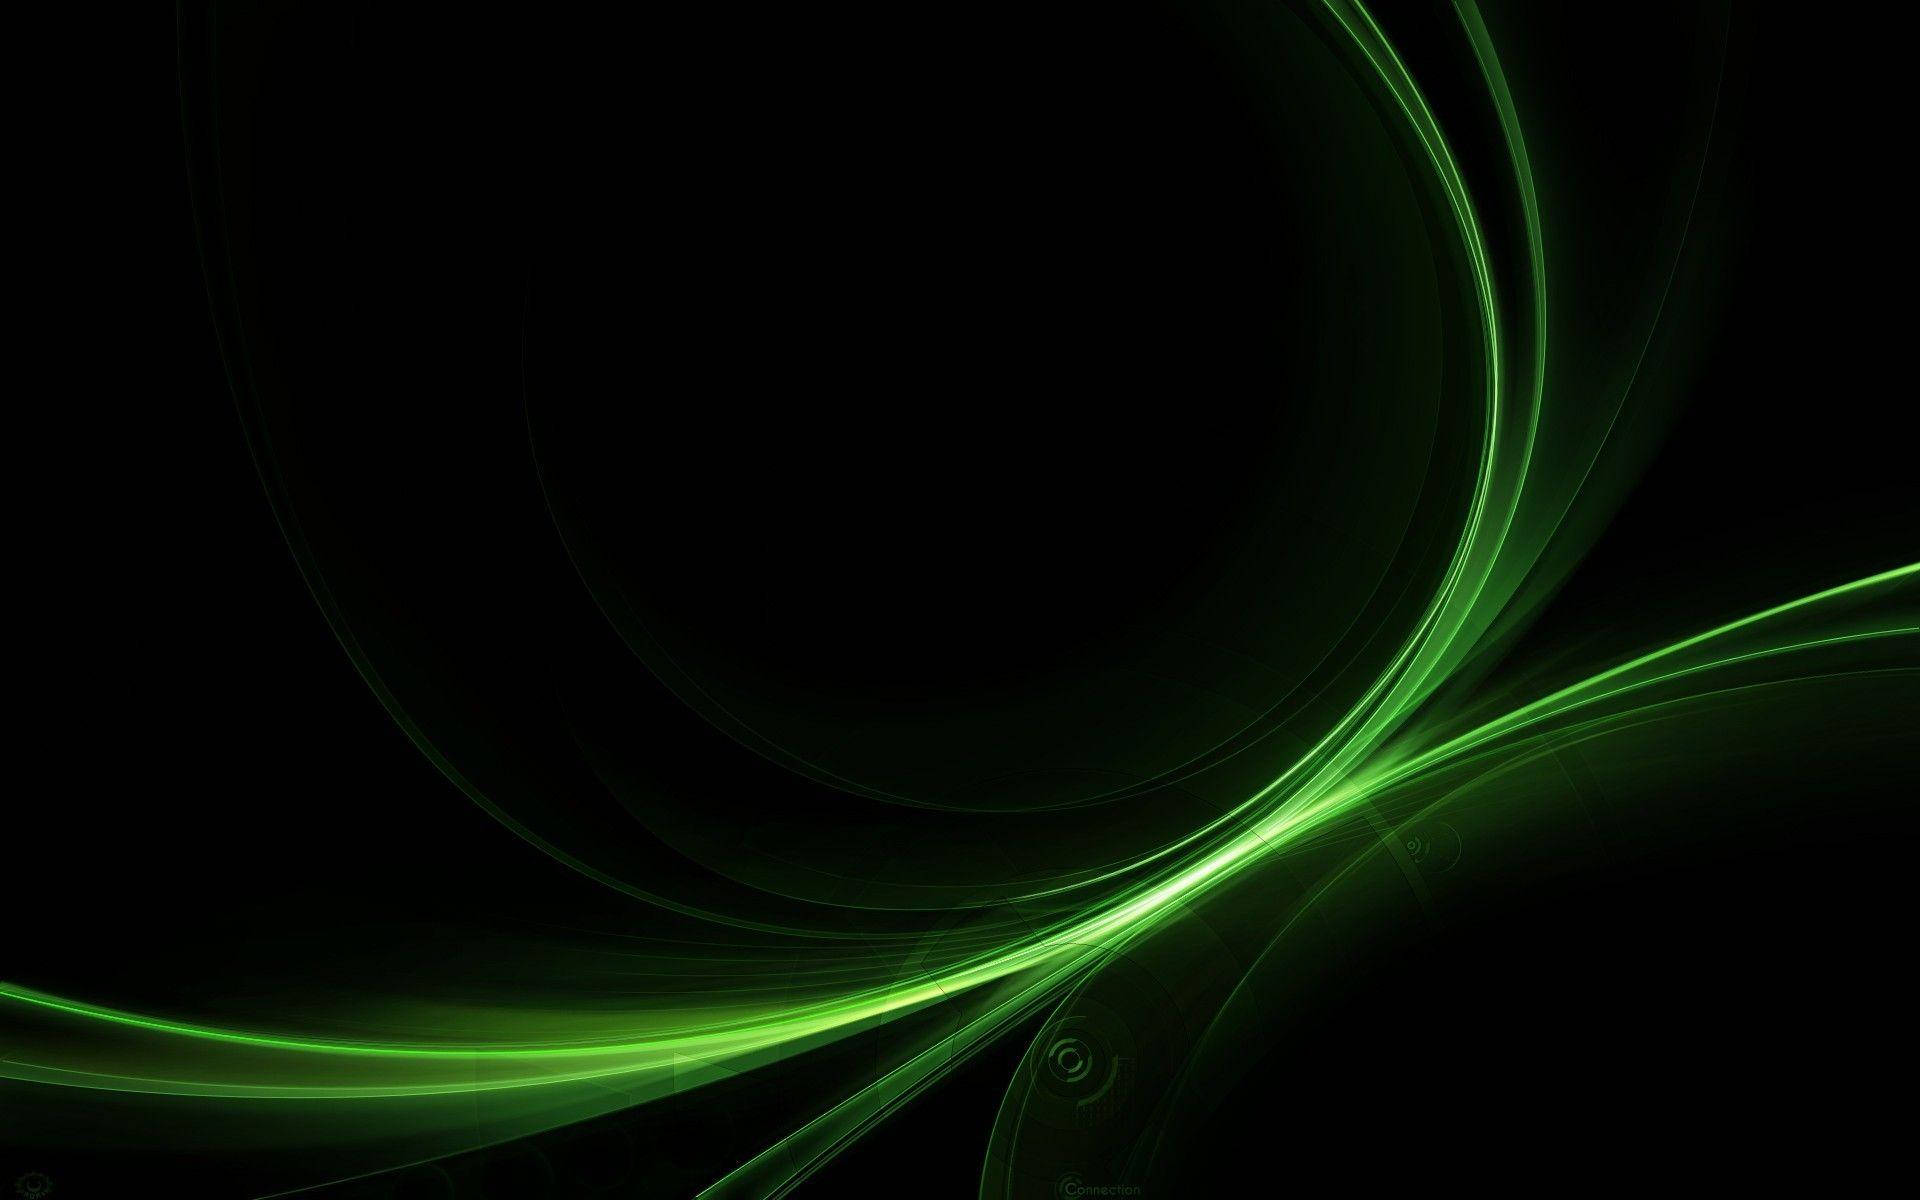 Intertwining Green Rays Abstract